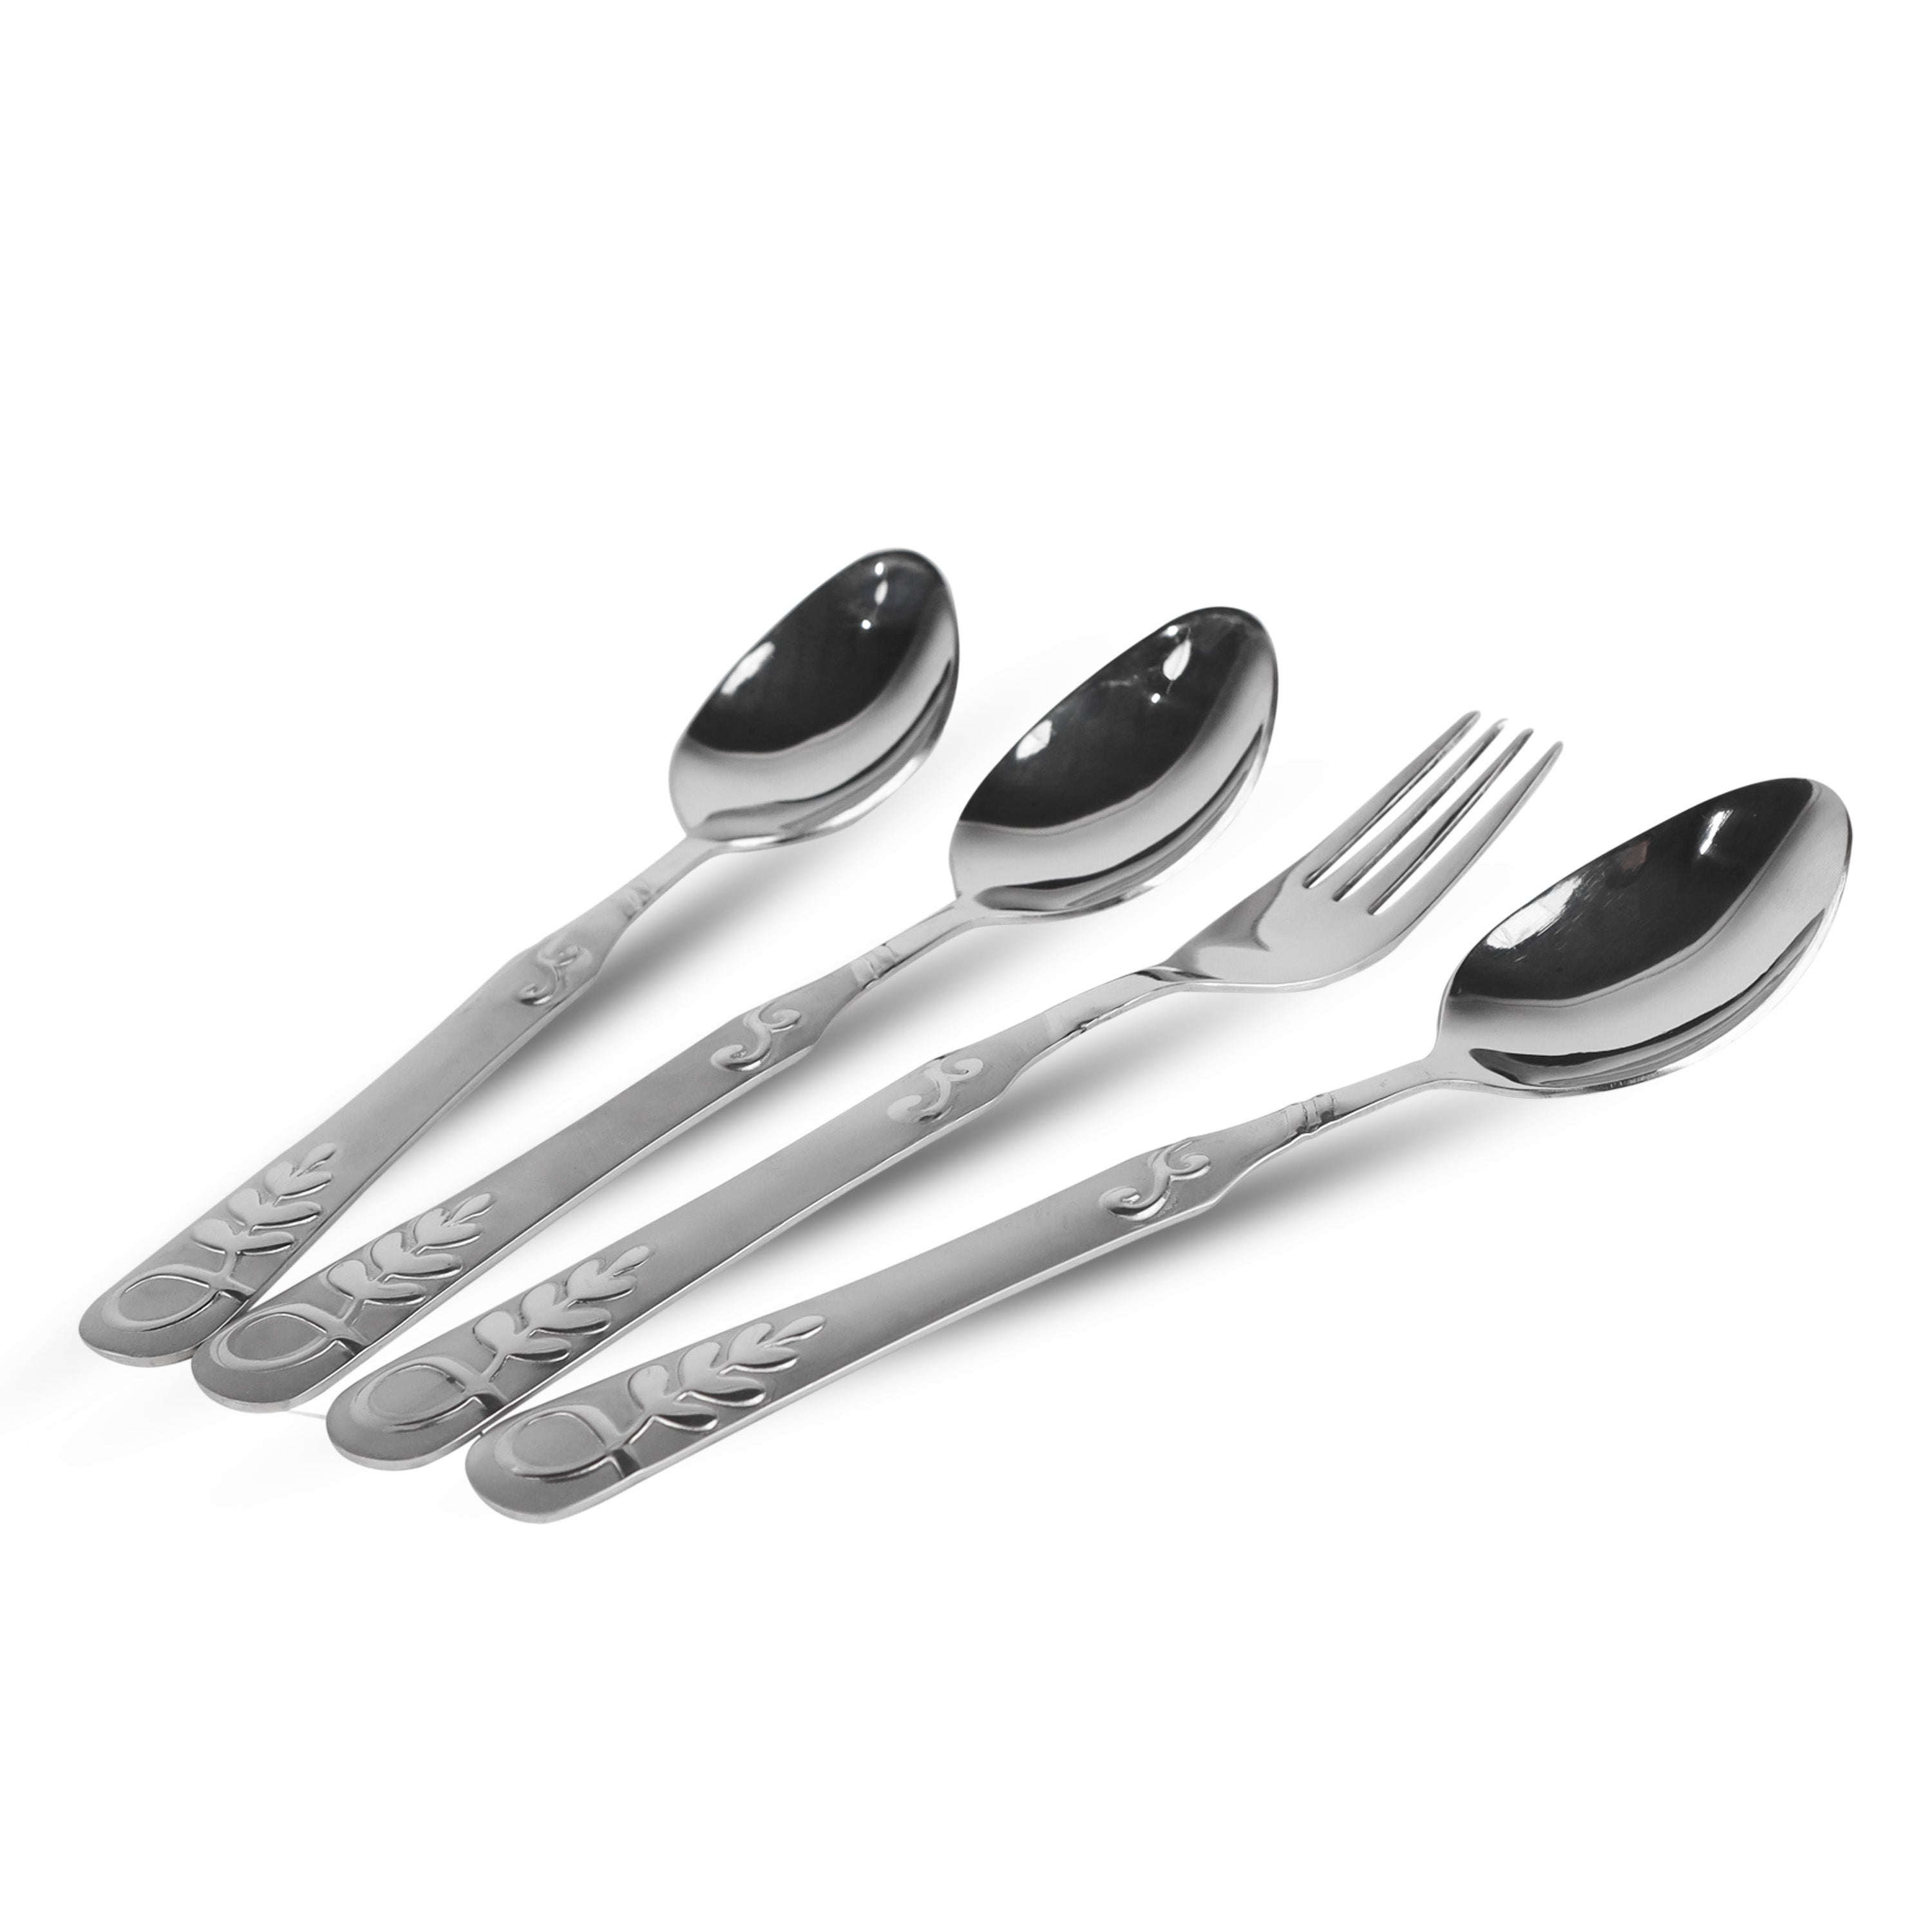 Chef Best Quality Stainless Steel 29 Pcs Cutlery Set - End Flower